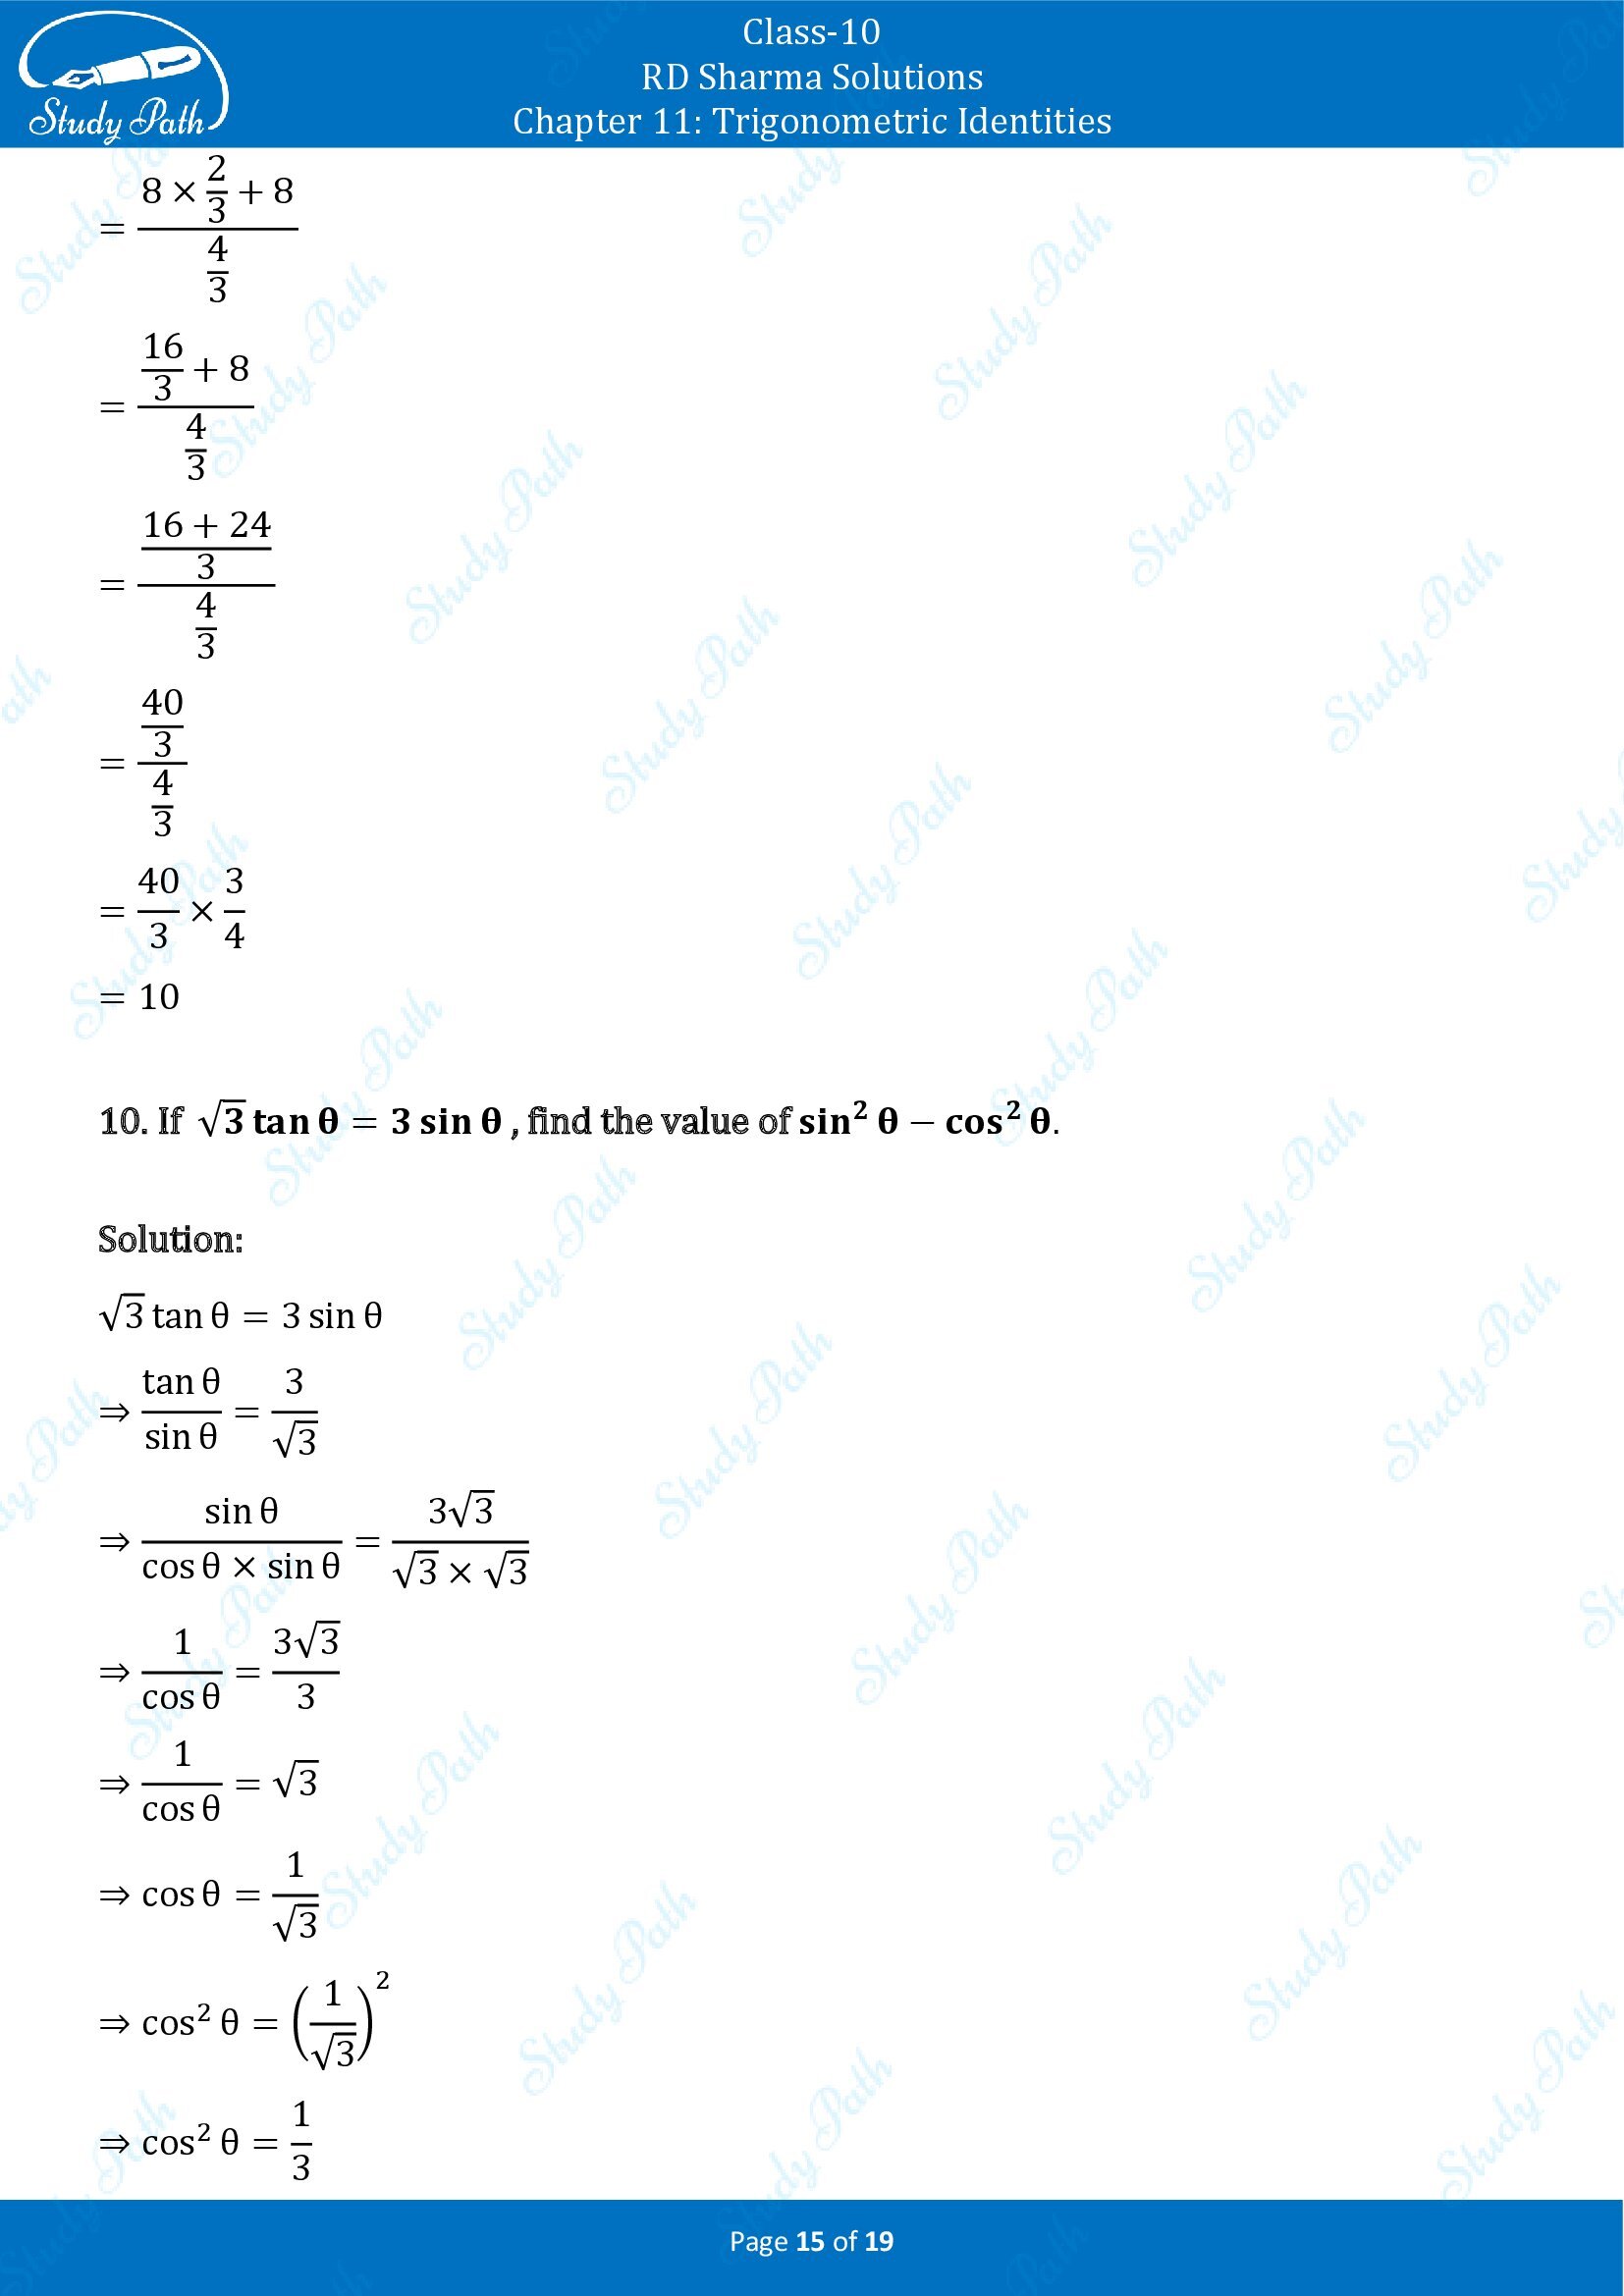 RD Sharma Solutions Class 10 Chapter 11 Trigonometric Identities Exercise 11.2 00015